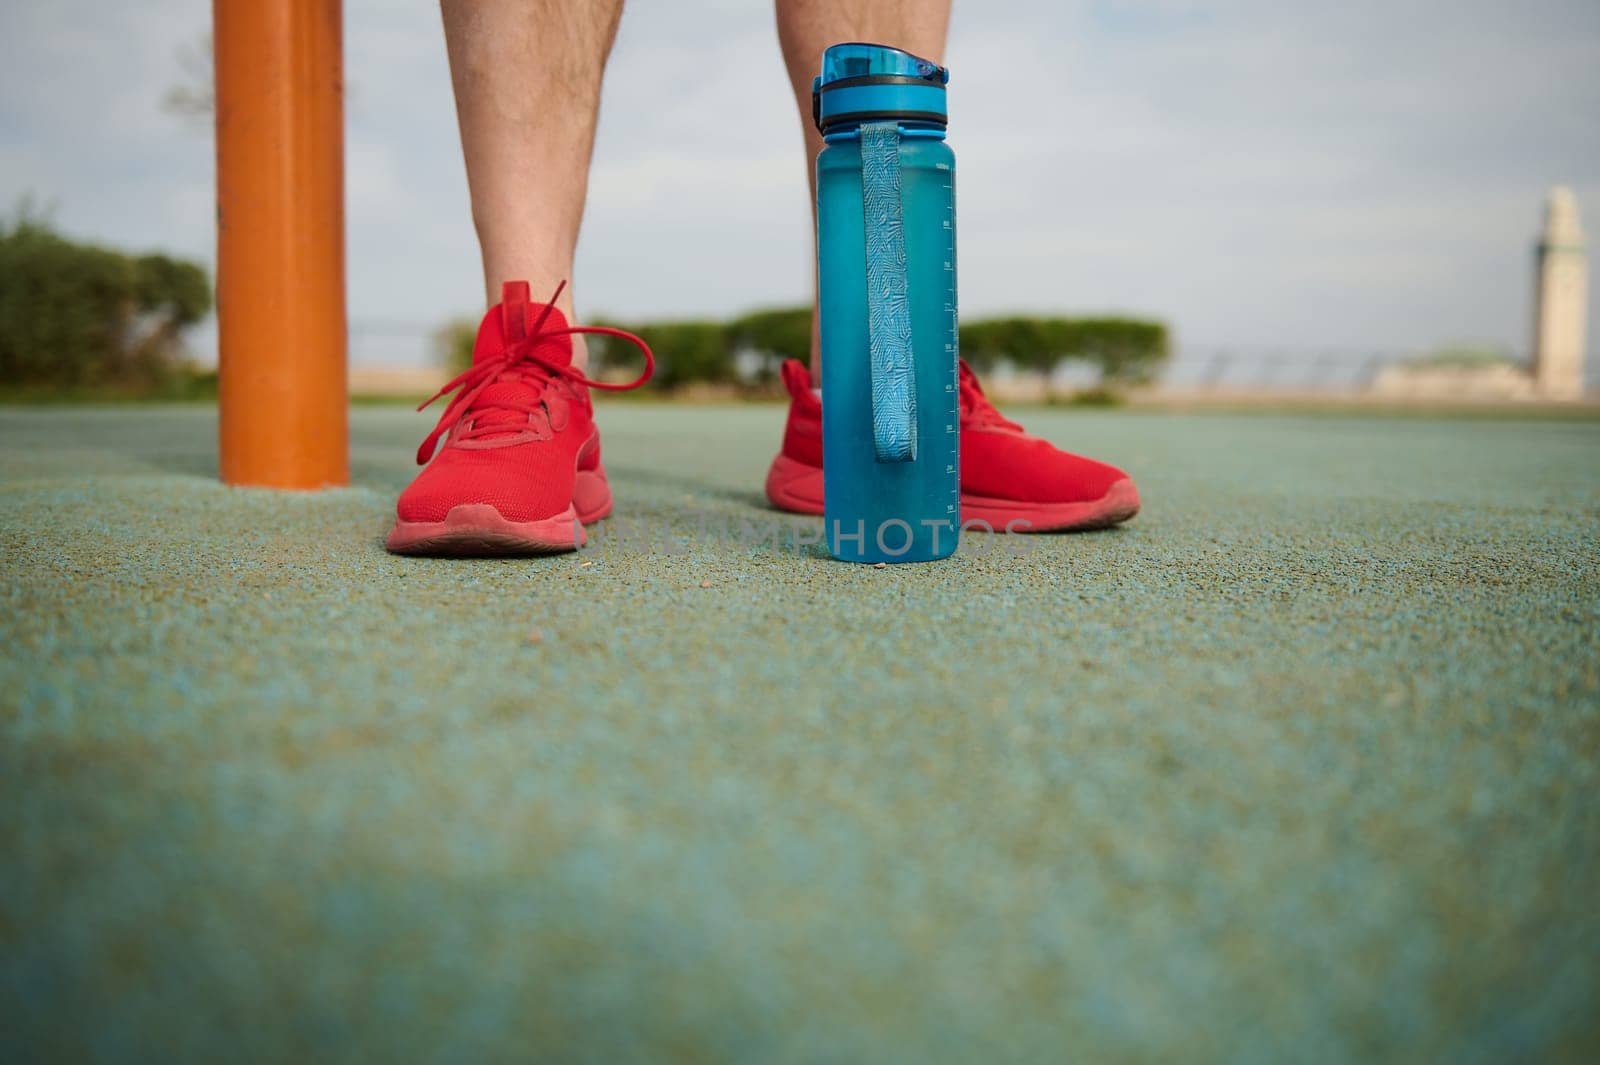 Cropped view of athlete's feet in red sneakers and bottle of water on the sportsground. Copy ad space by artgf